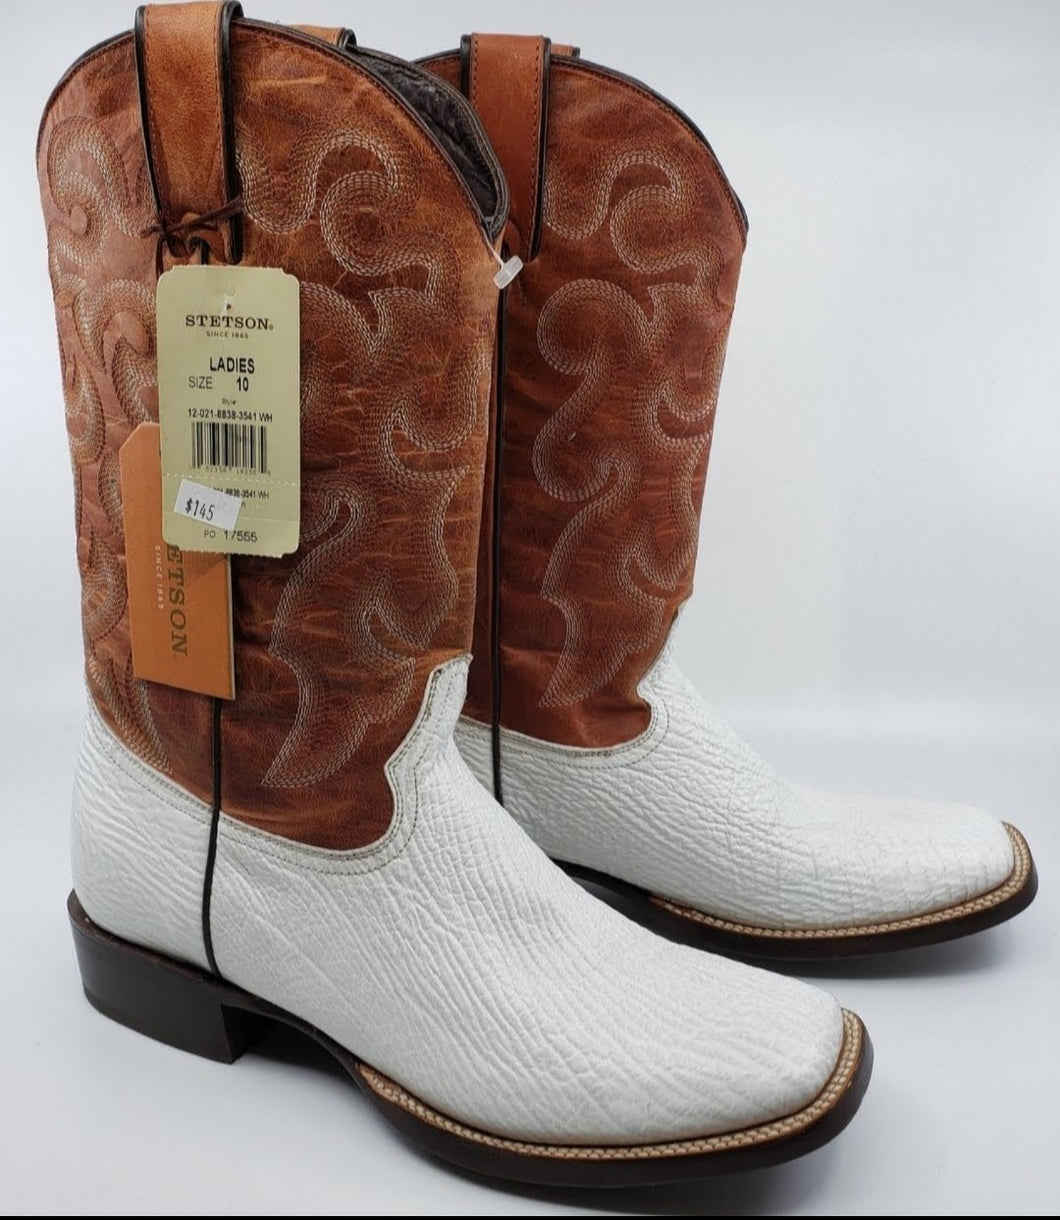 R Stetson White Boots size 10 new